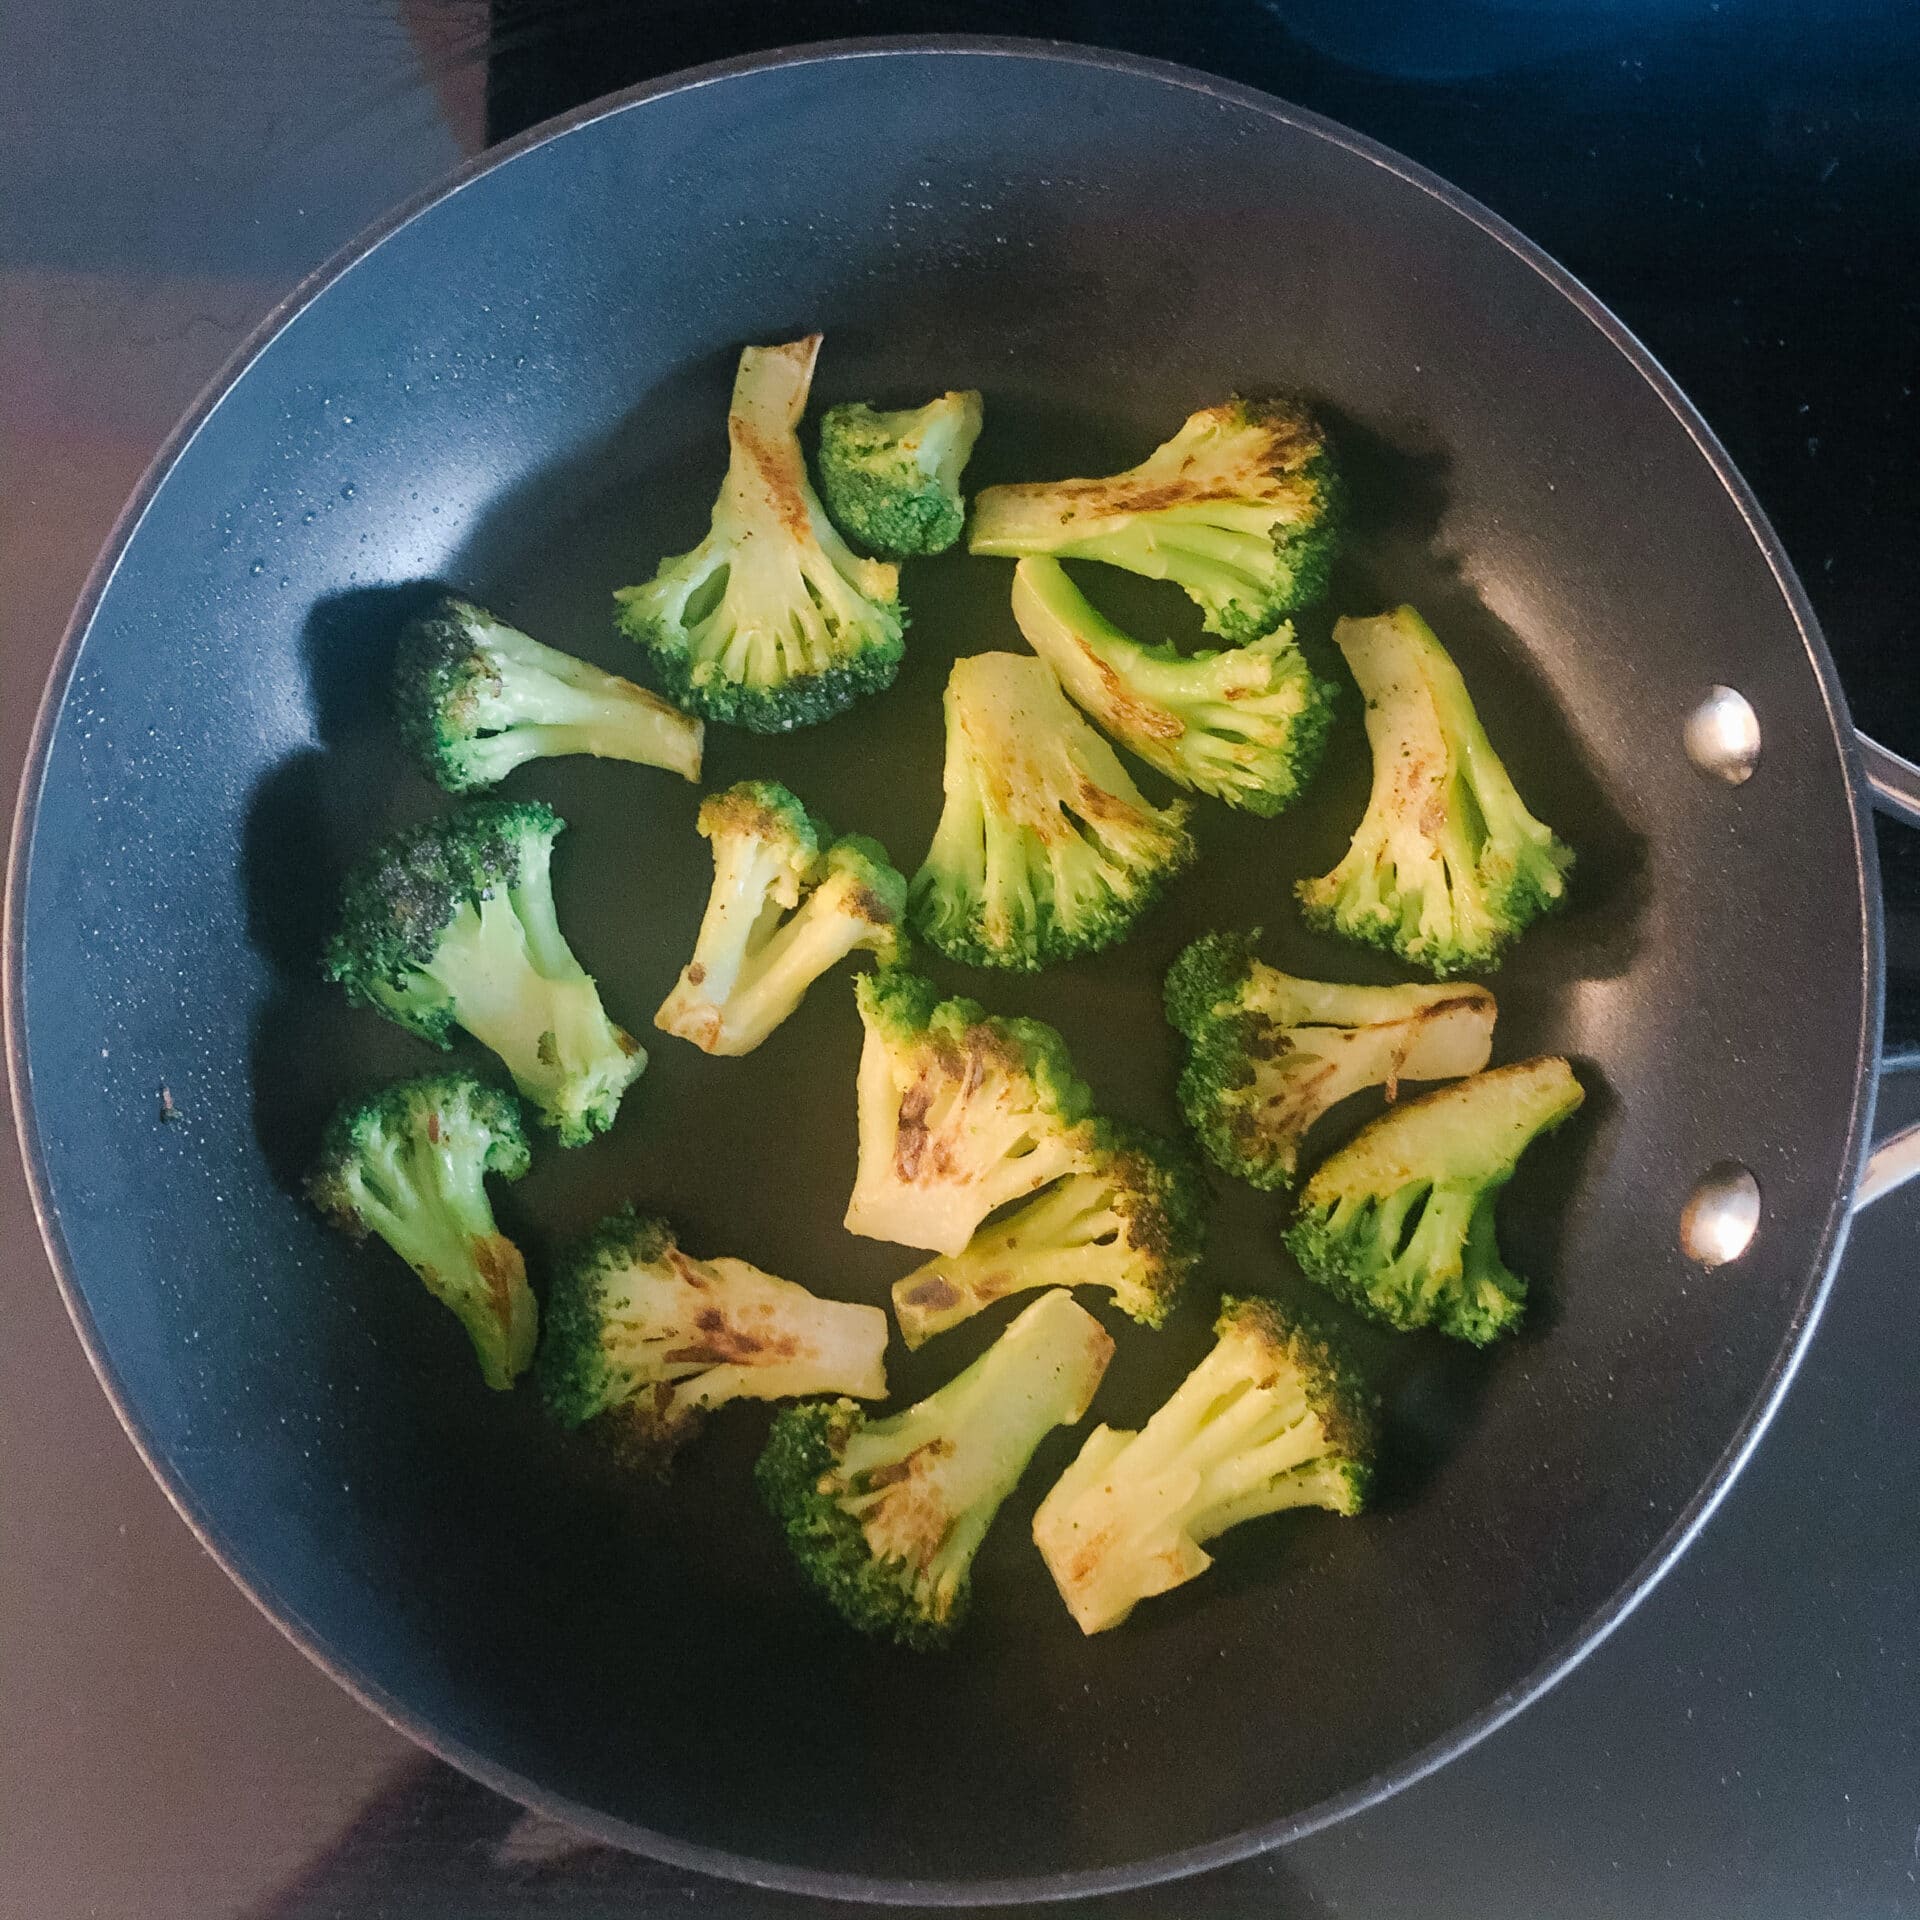 Best Way to Cook Frozen Broccoli on Stovetop